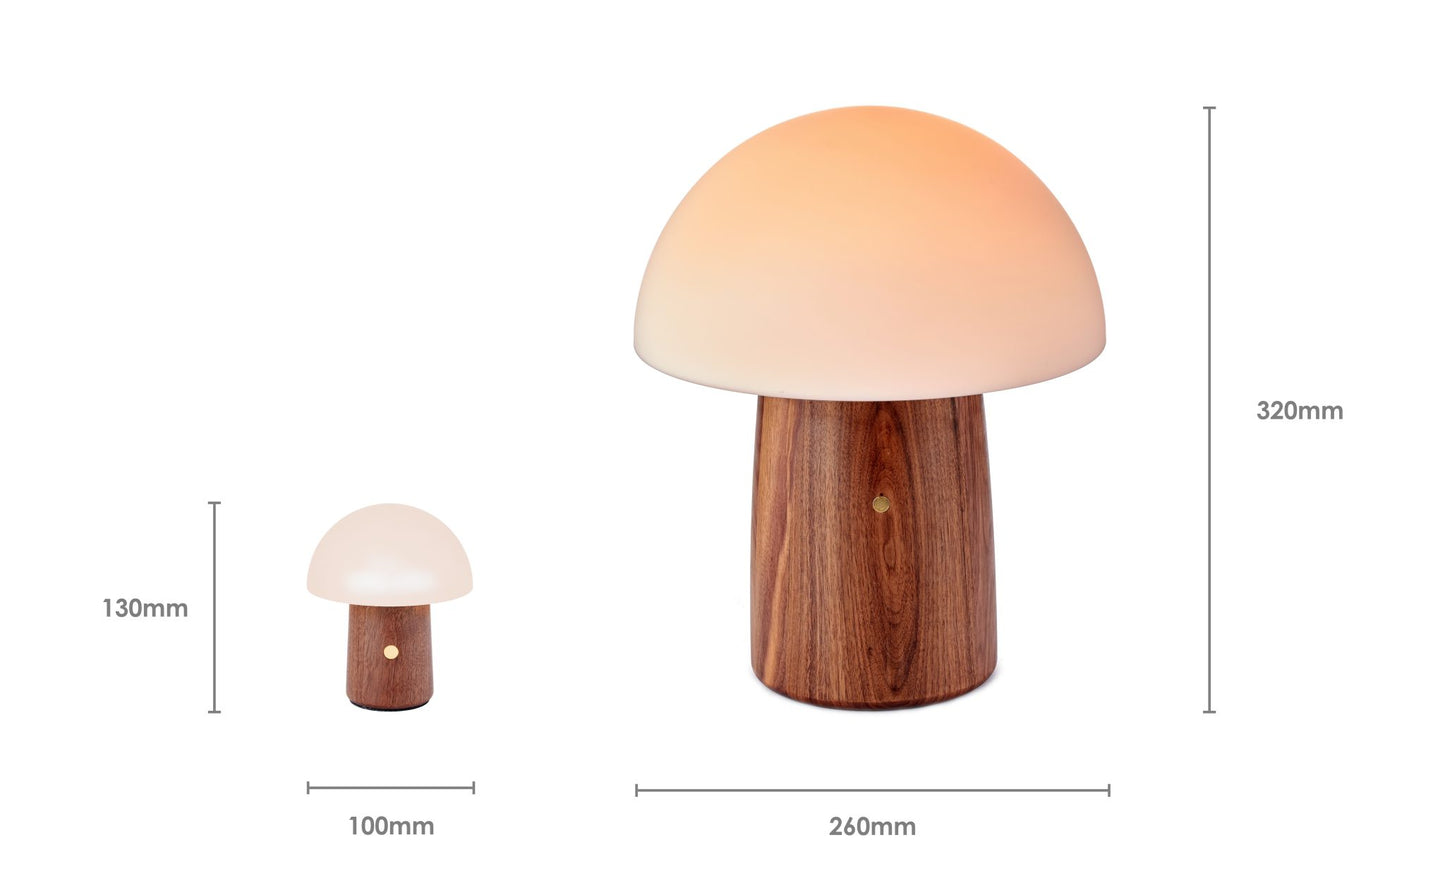 Alice Mushroom Lamp for end table or nightstand